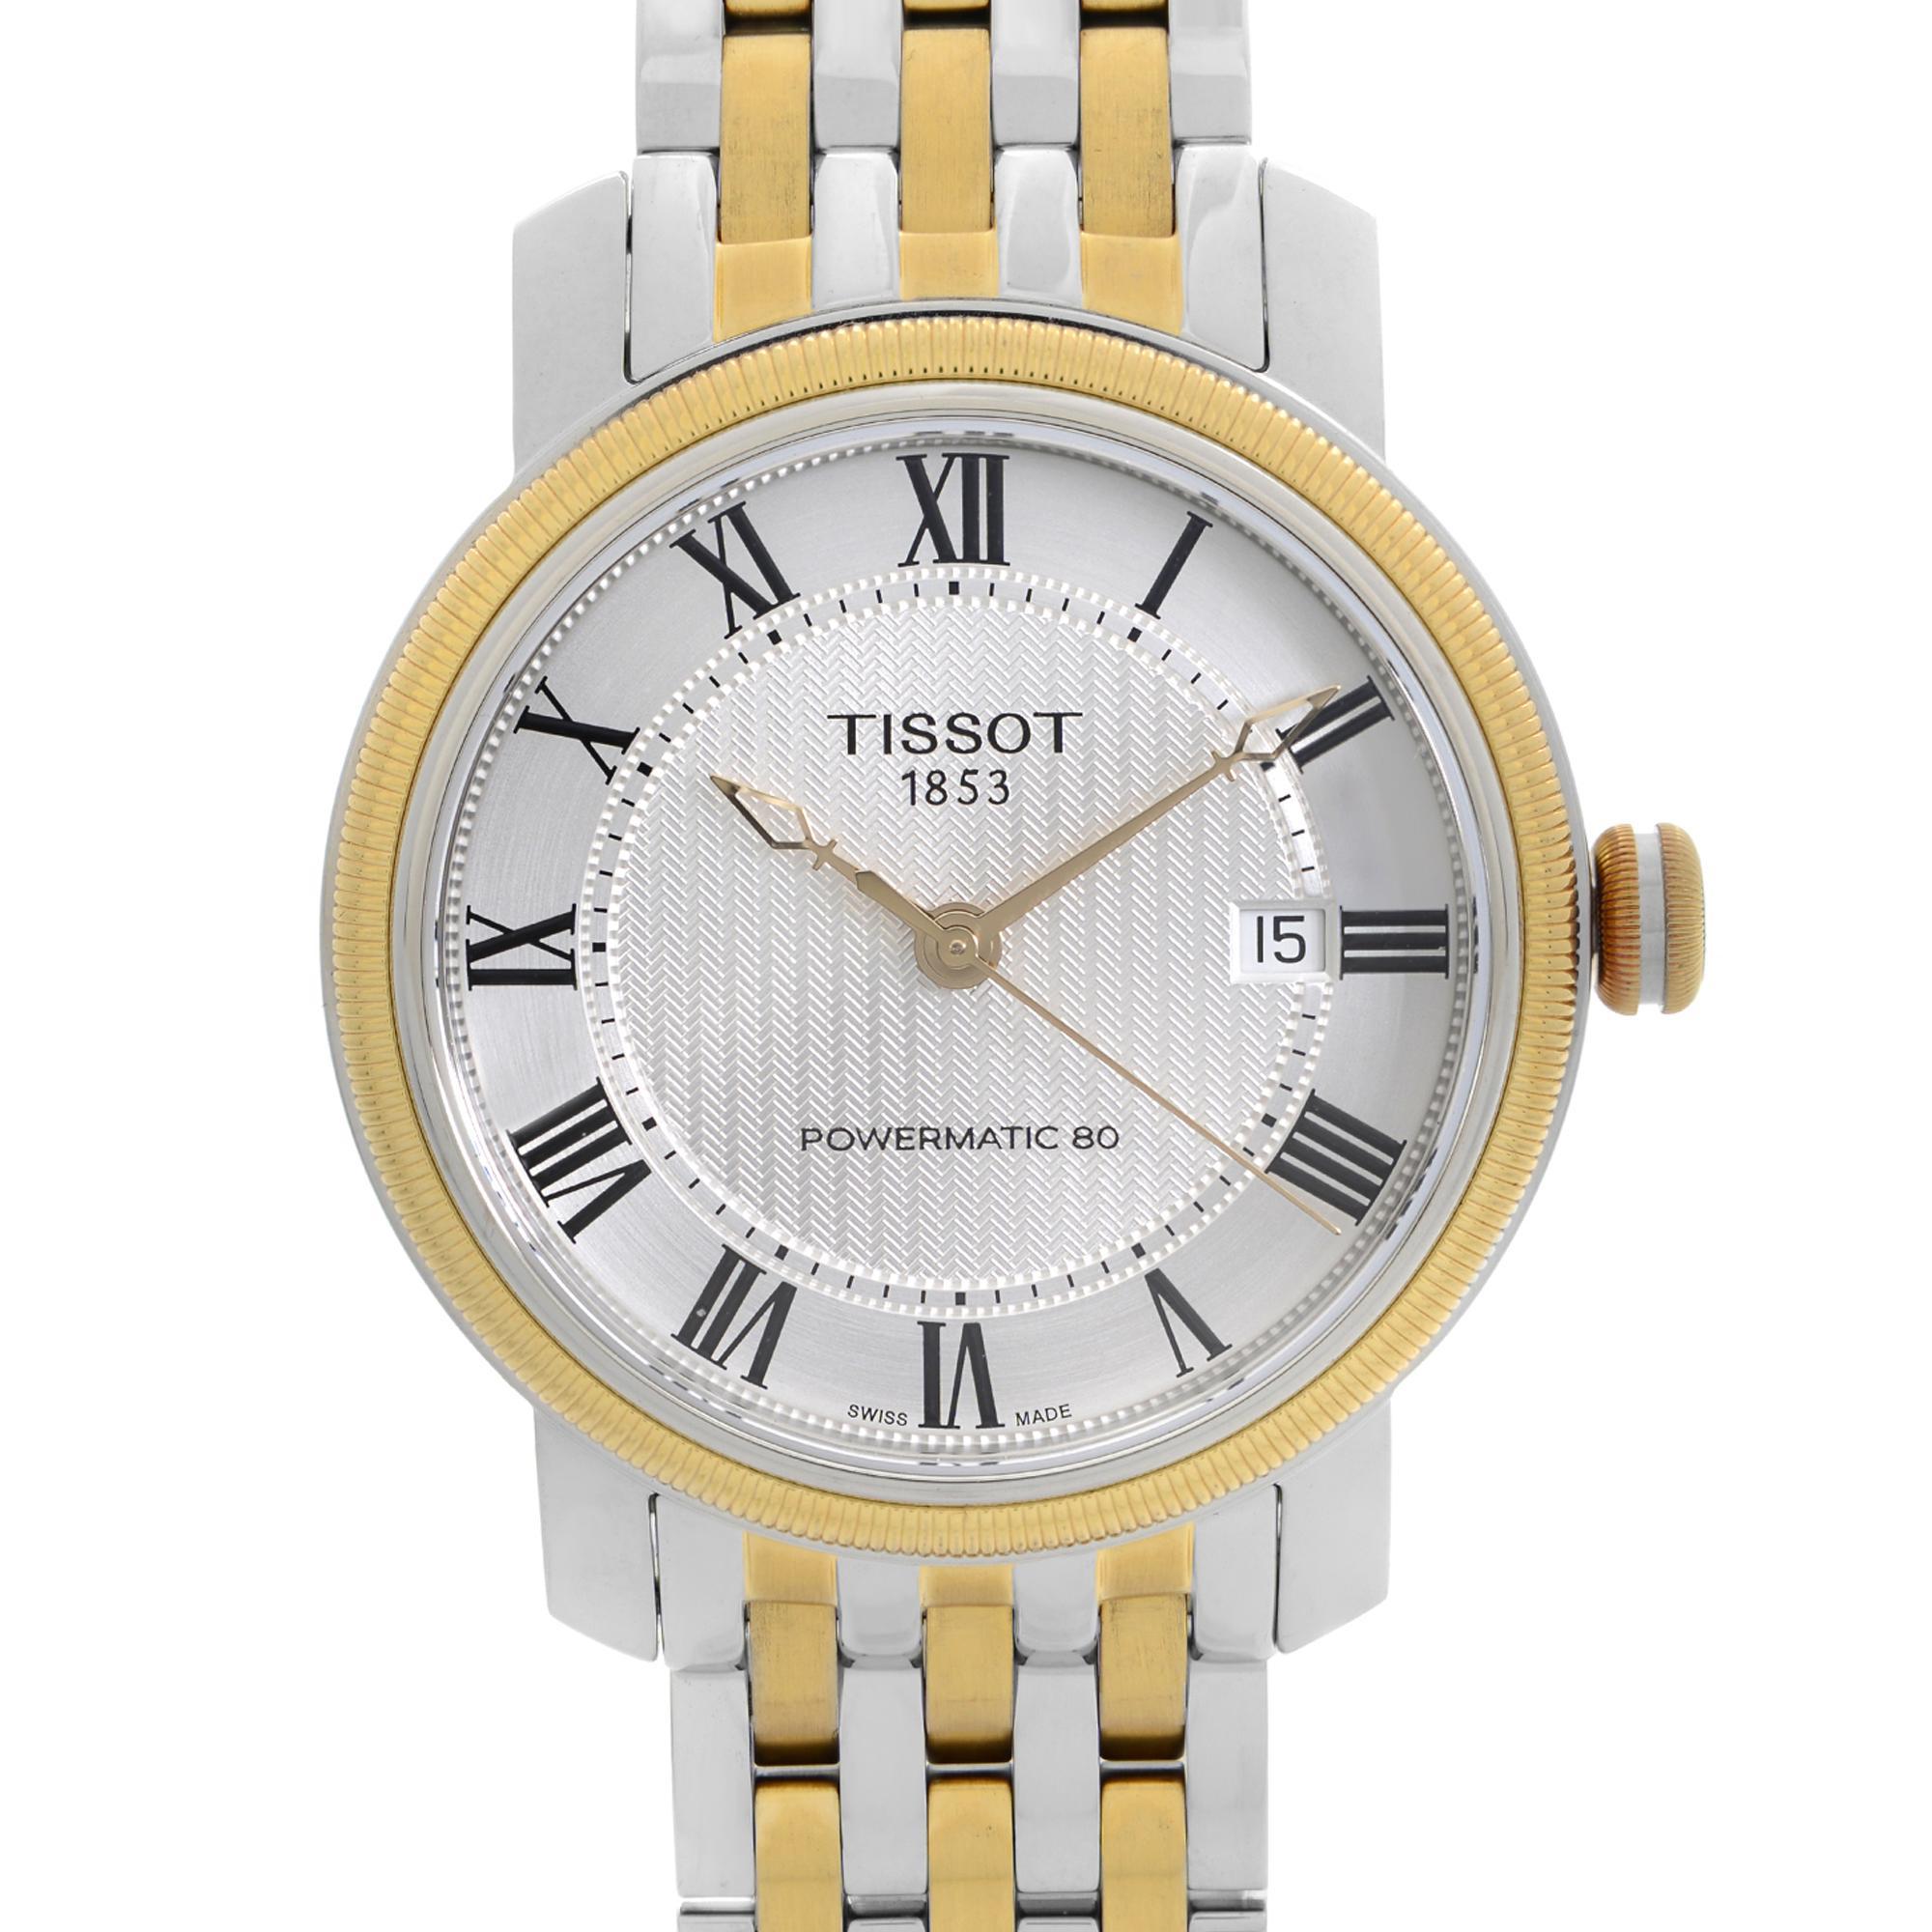 Display Model Tissot Bridgeport Two-Tone Silver Dial Automatic Mens Watch T045.407.22.033.00. This Beautiful Timepiece is Powered by Mechanical (Automatic) Movement And Features: Round Stainless Steel Case with a Two-Tone (Steel & Yellow Gold PVD)